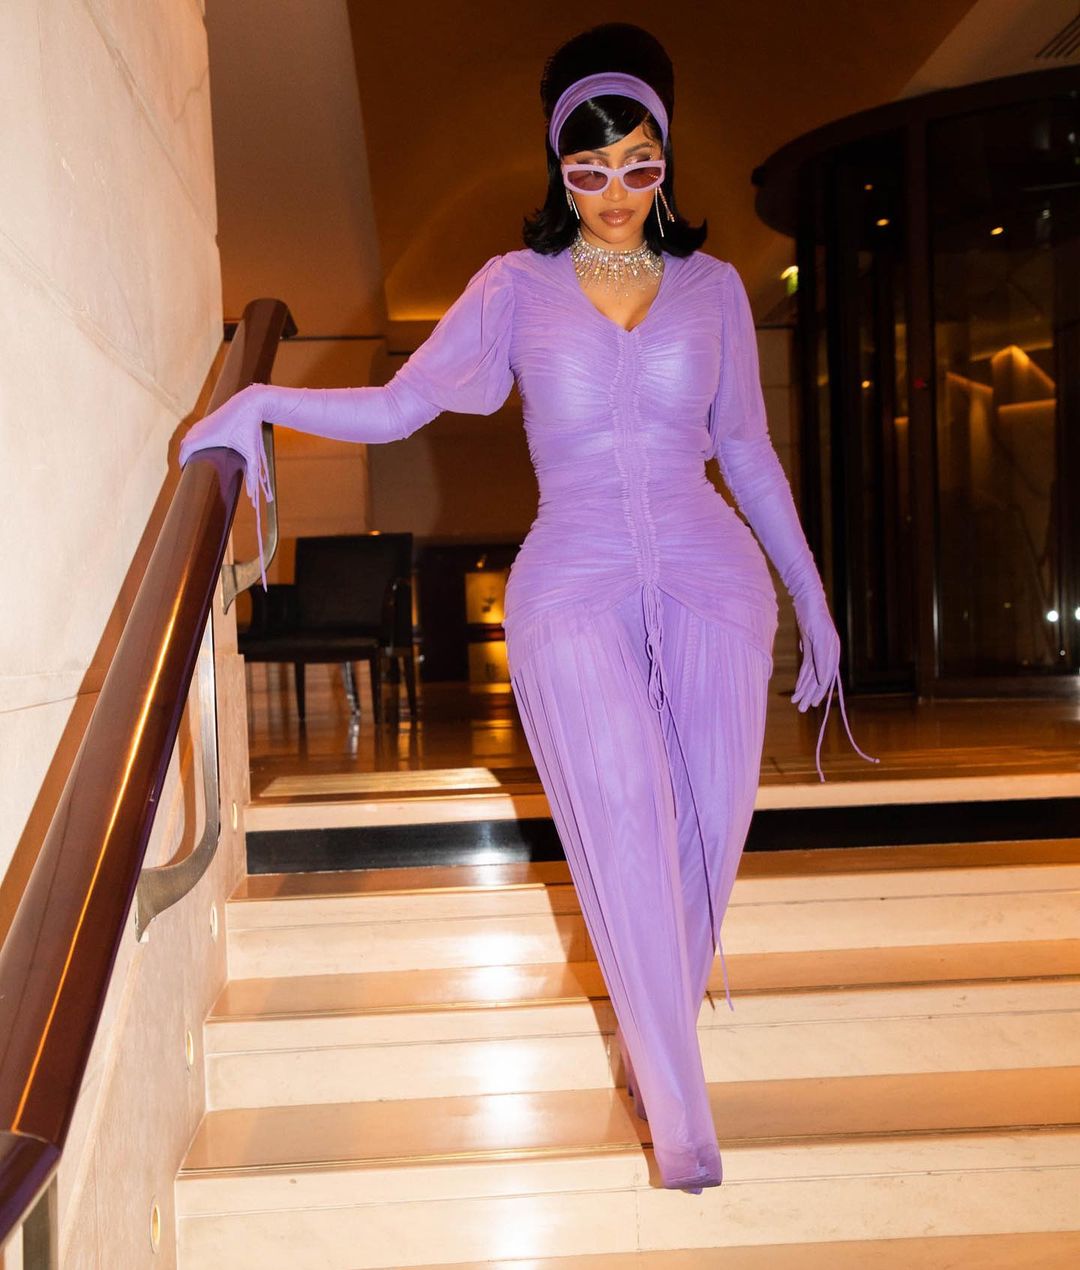 Cardi B May Be The Most Stylish Libra – Here Are Her Most Iconic Looks To Prove It